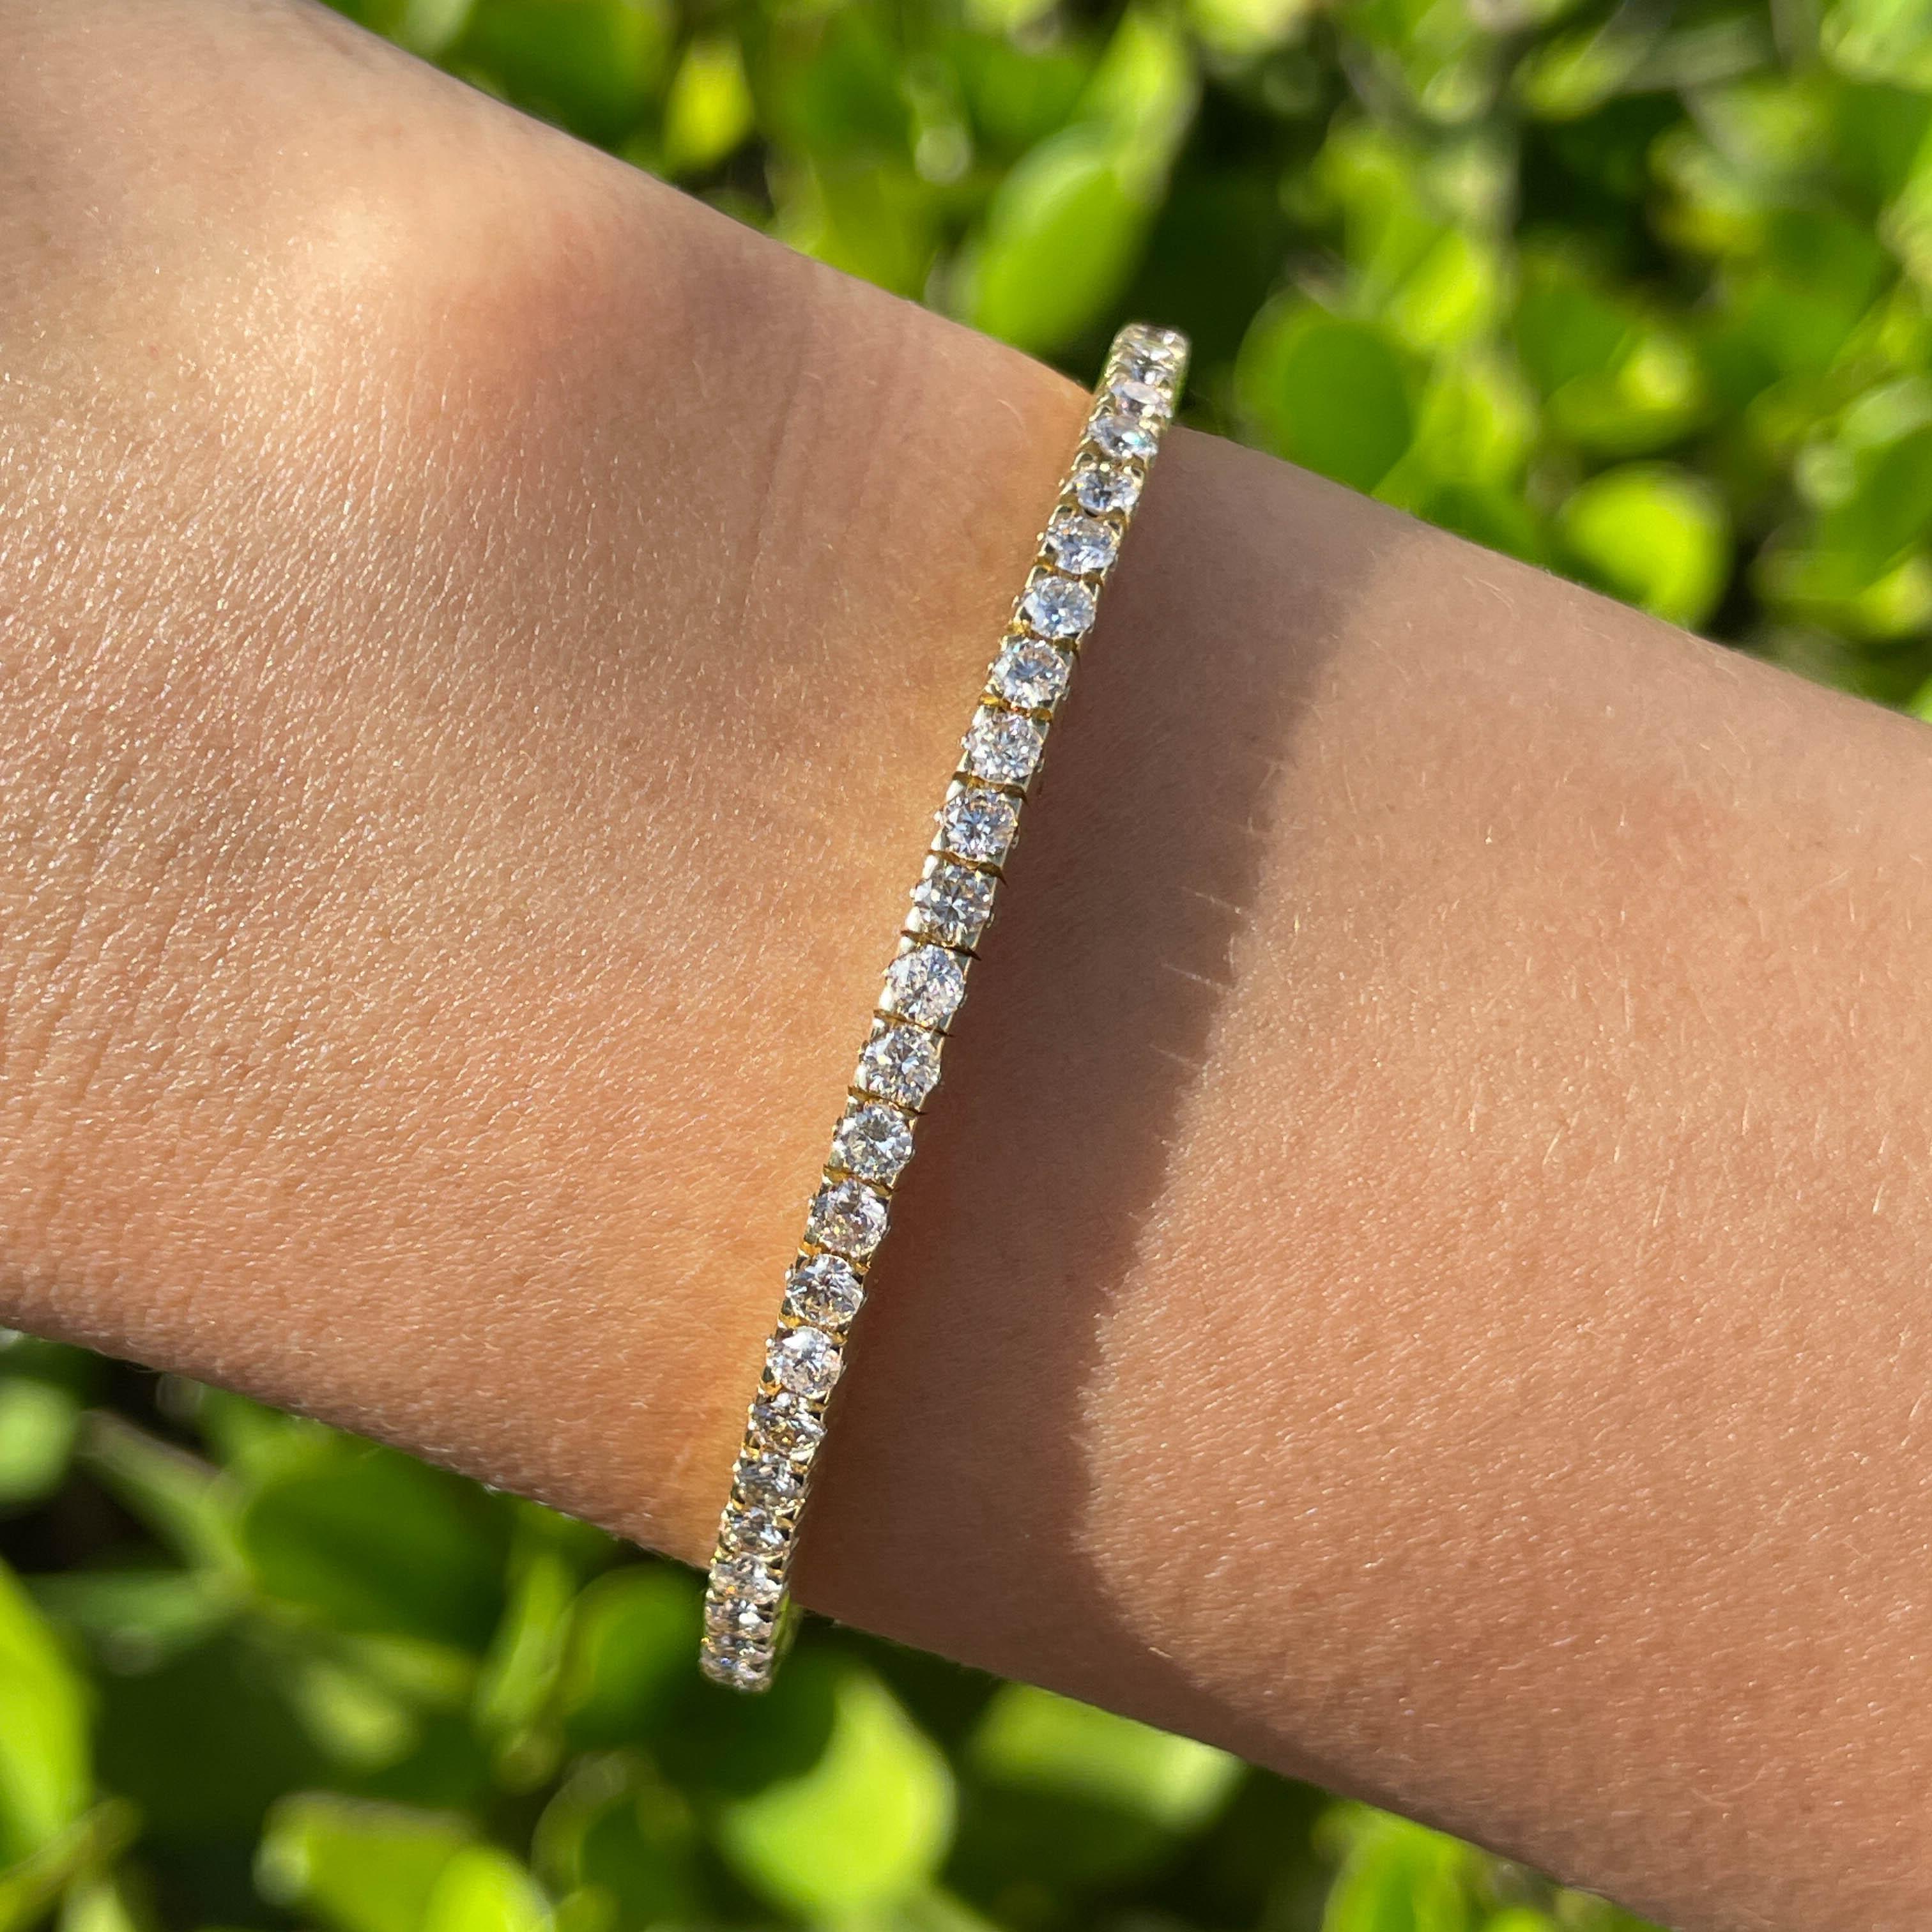 Jay Feder 18k Yellow Gold Round Diamond Stretchy Tennis Bangle Bracelet

Set with 60 round diamonds; total carat weight is 5.25ctw.

The bracelet is 2.5 inches in diameter and 3.41mm wide. Total weight is 19.4 grams.

Please view our photos and